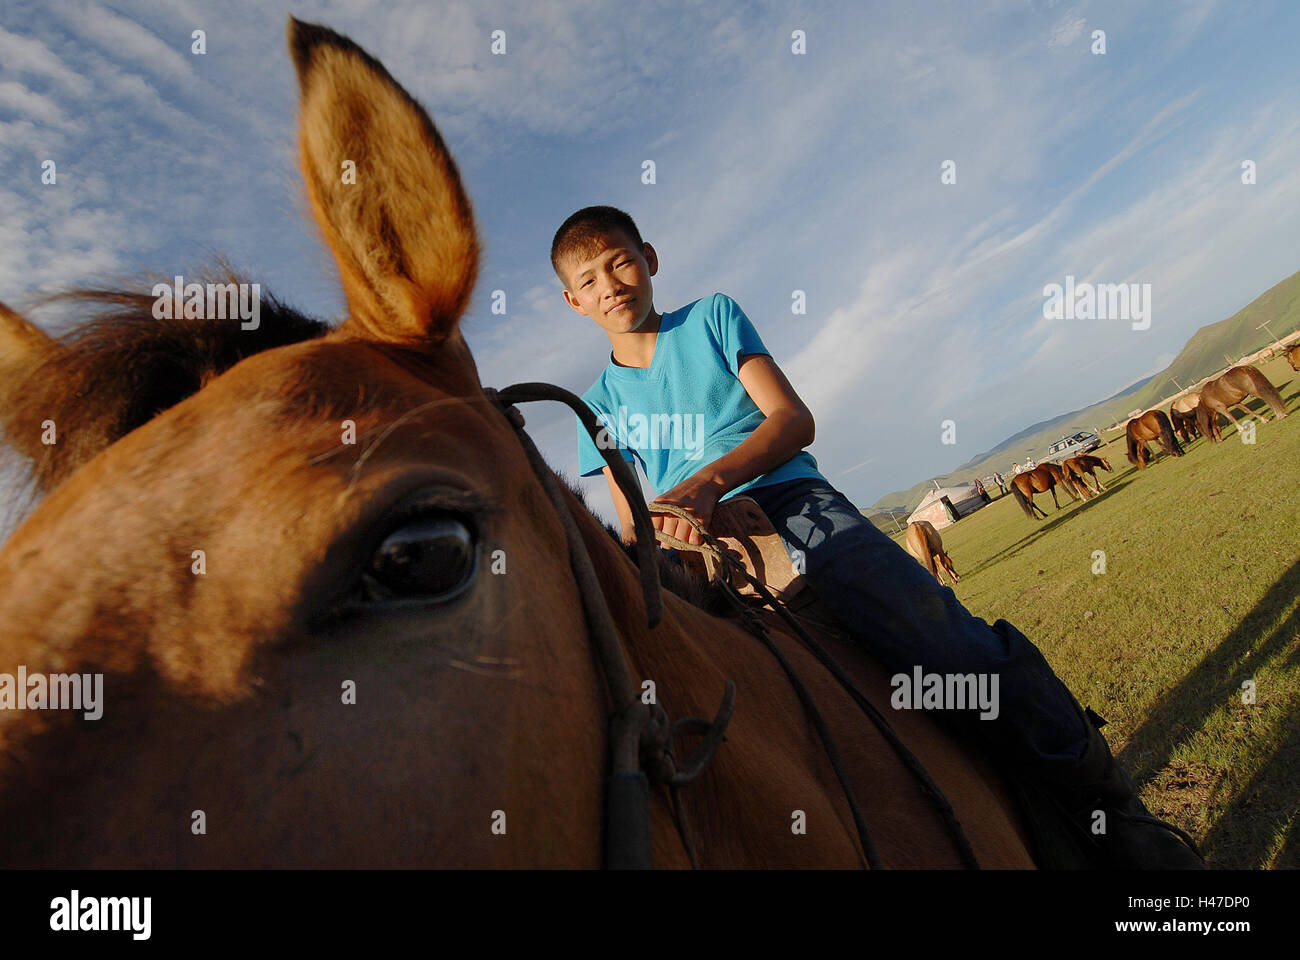 Mongolia, boy, horse, ride, detail, no model release, person, local, Mongol, teenager, young person, pasture, animals, benefit animals, stock animals, horse breeding, bleed, Stock Photo